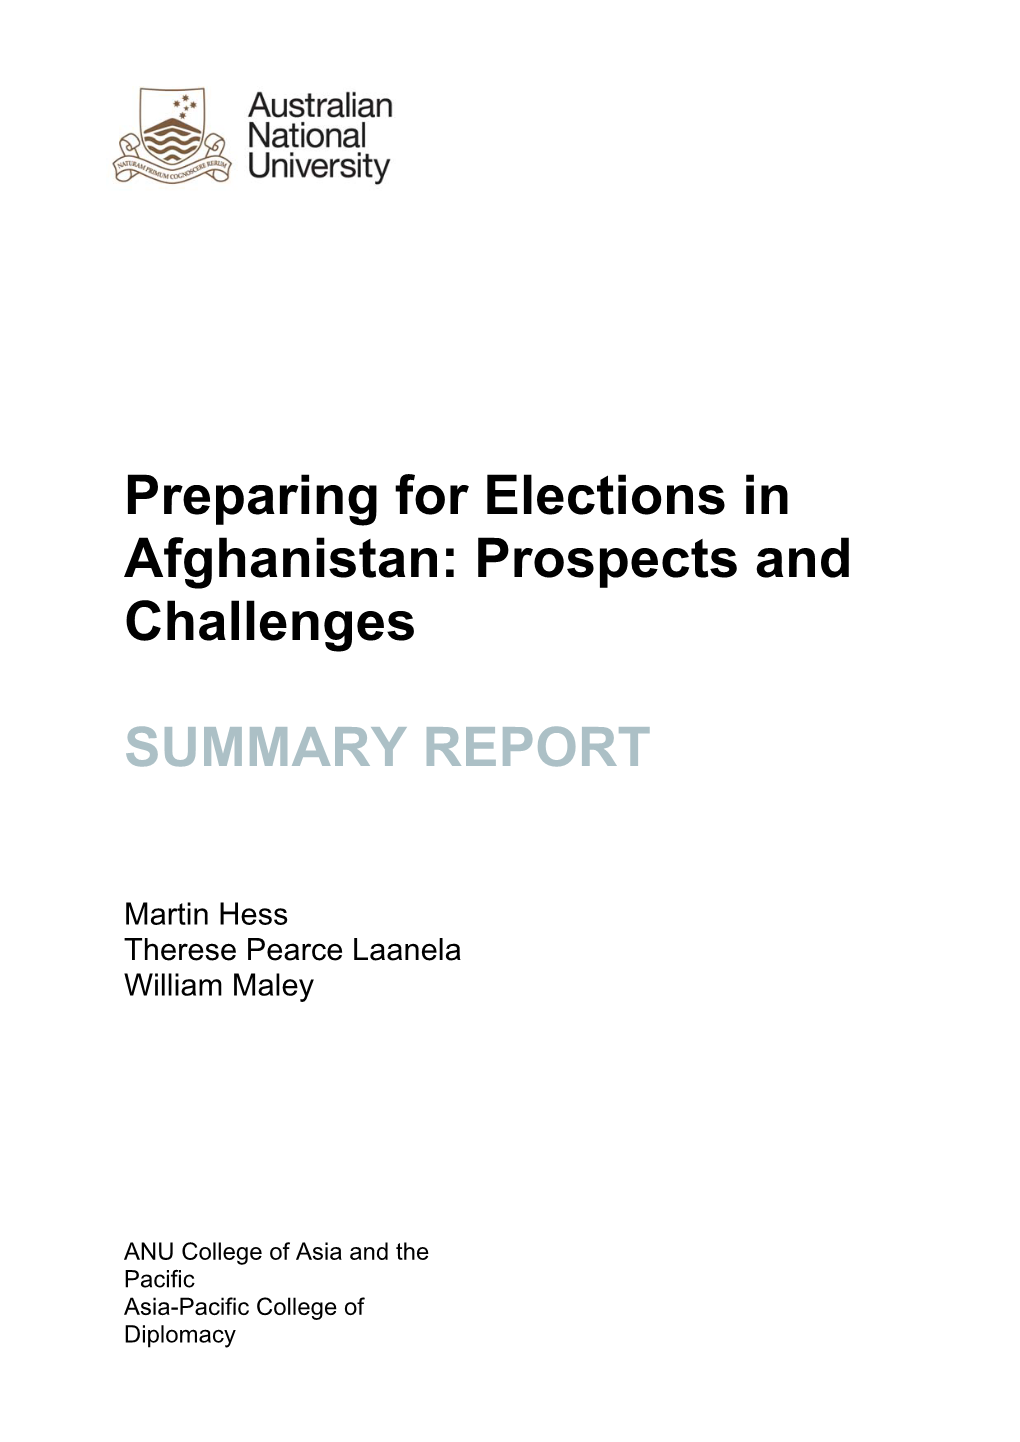 Elections and Afghanistan